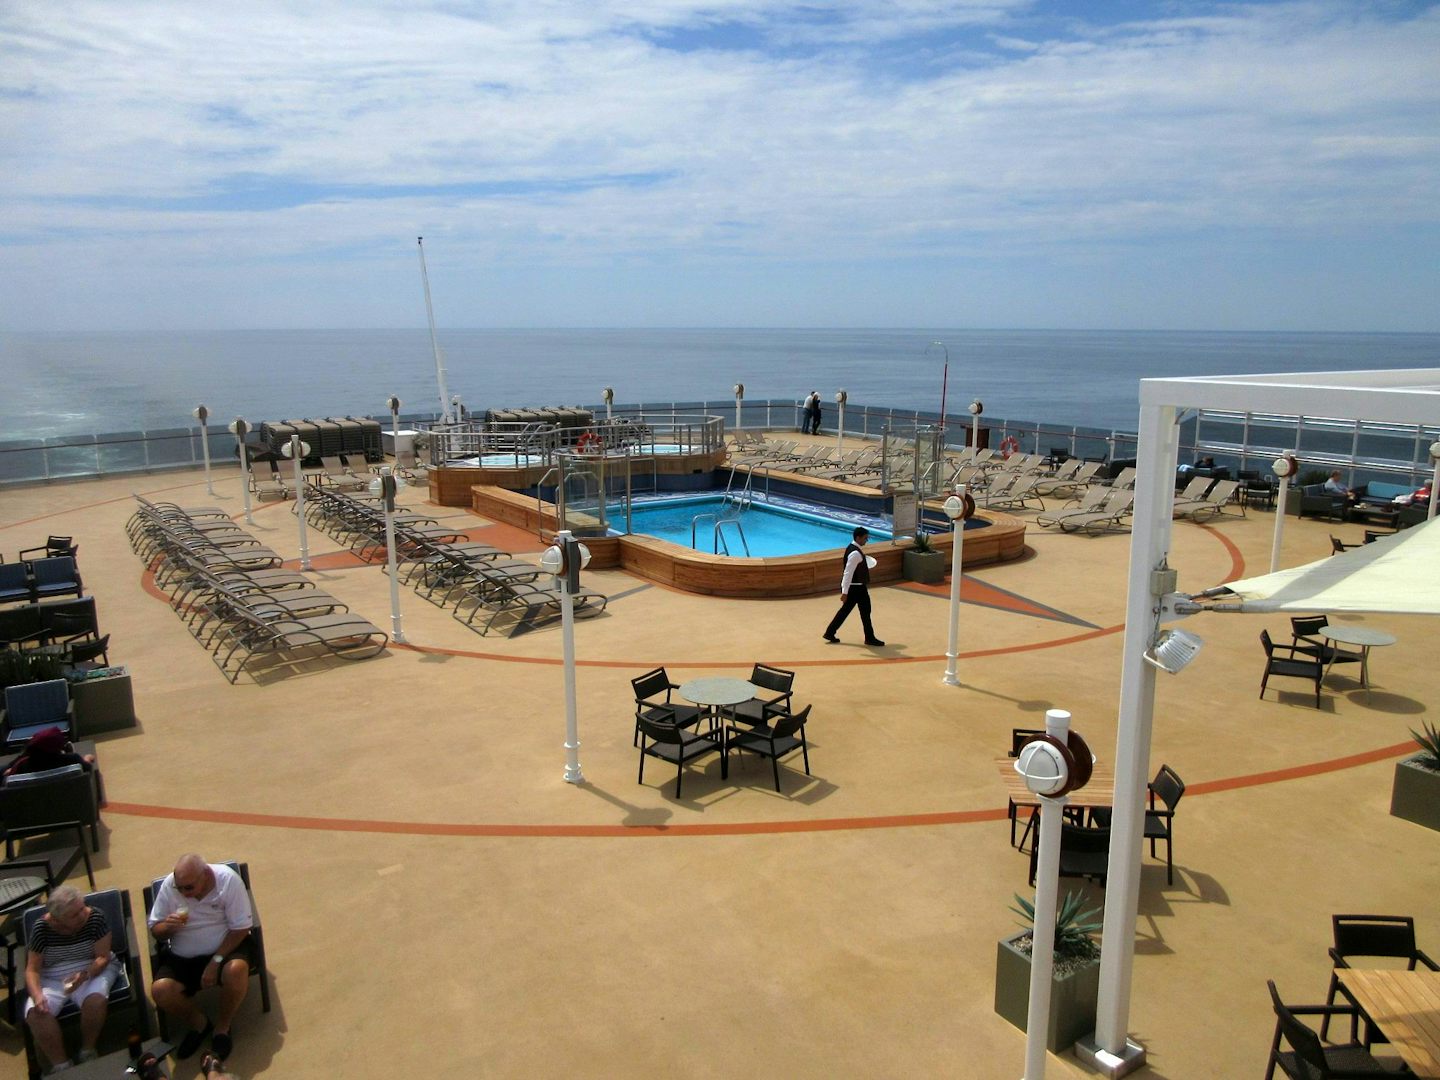 Lido deck and pool